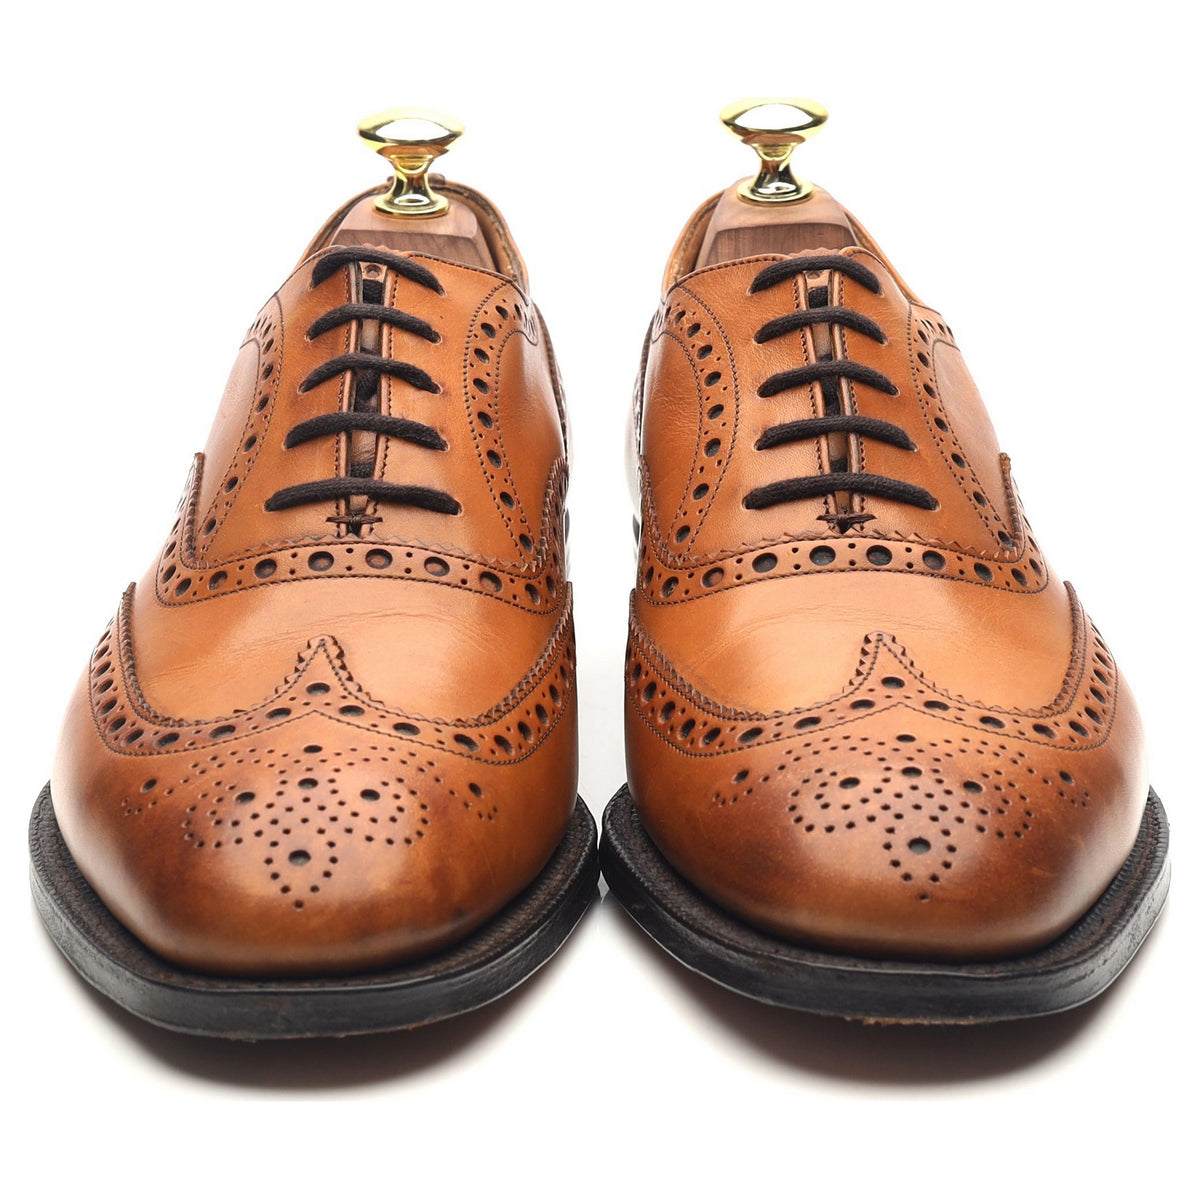 Brisbane' Tan Brown Leather Brogues UK 7 F - Abbot's Shoes